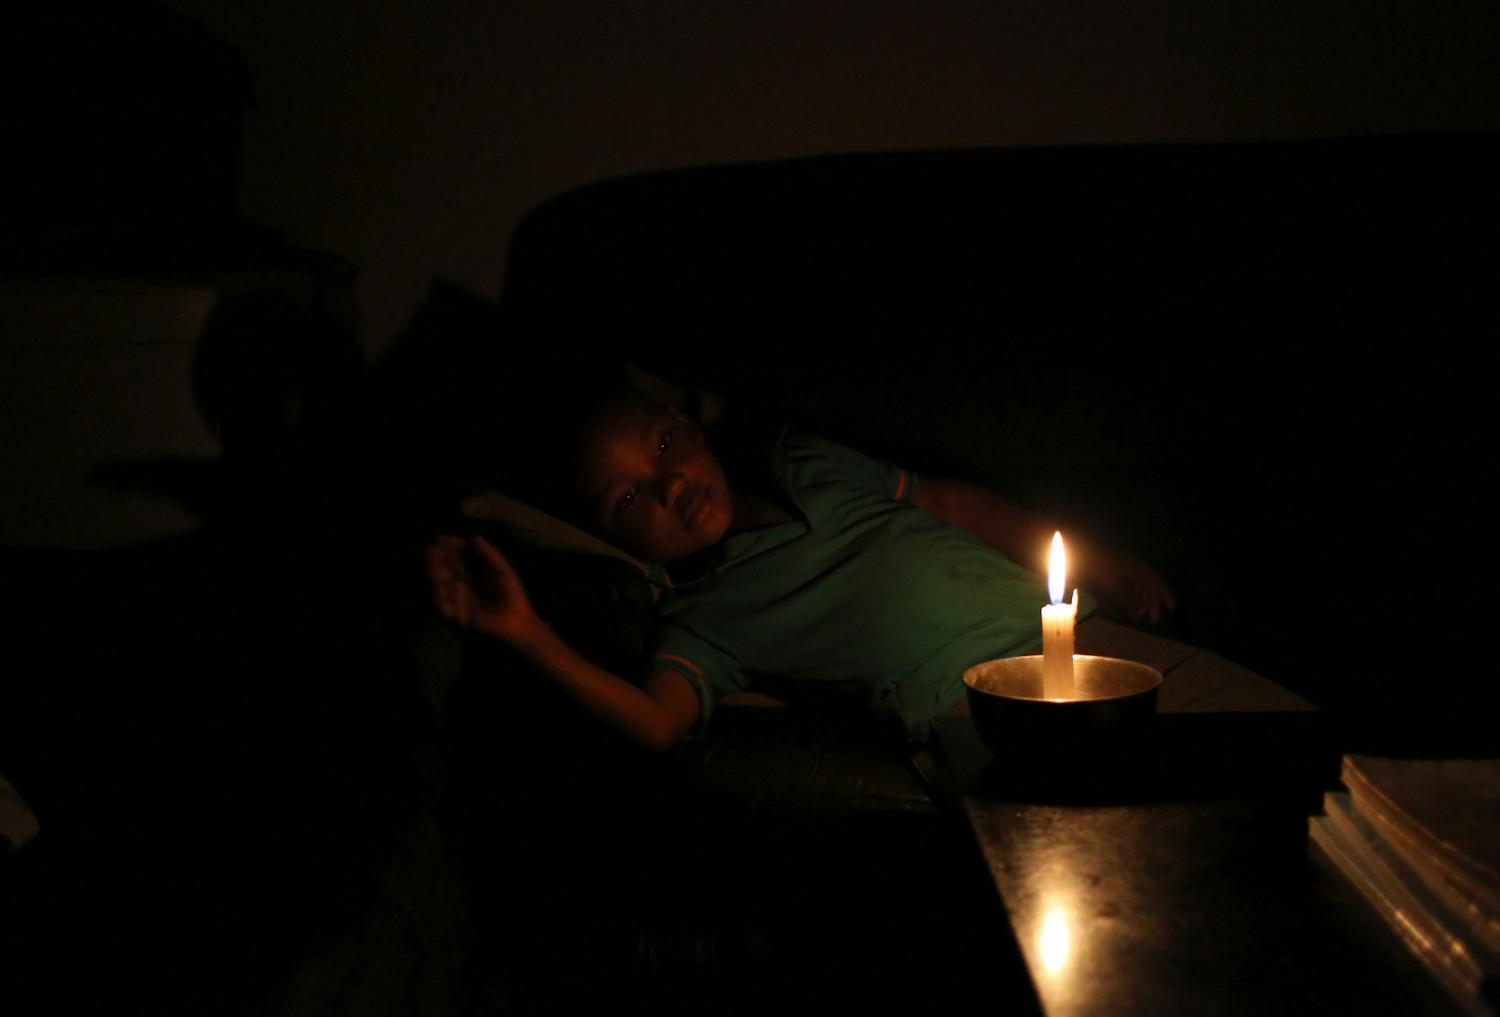 A child rests while illuminated by candle light during a scheduled blackout in South Africa